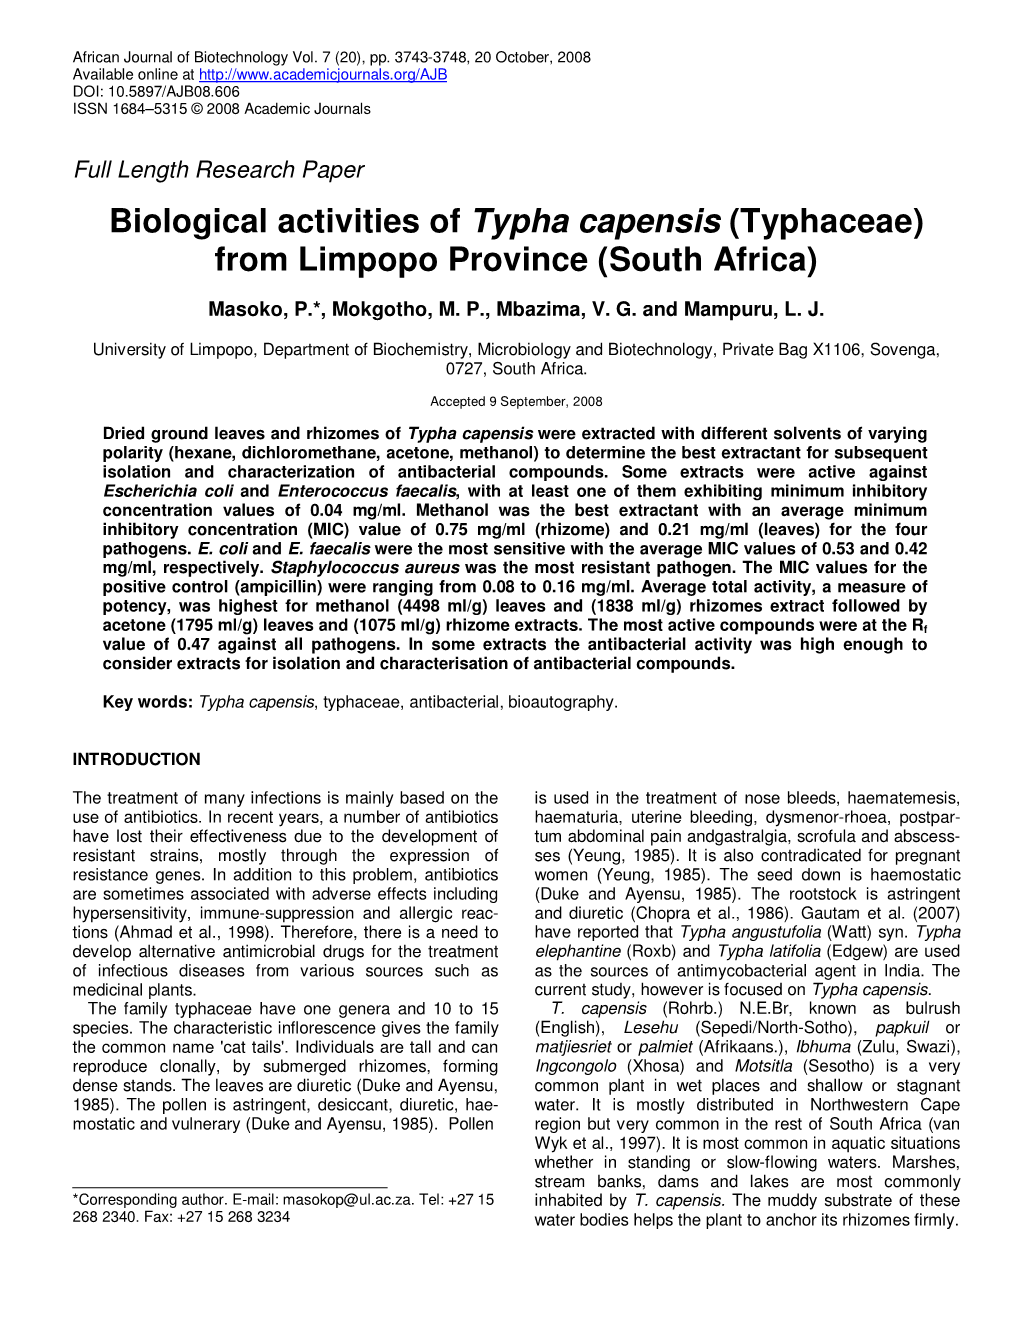 Biological Activities of Typha Capensis (Typhaceae) from Limpopo Province (South Africa)